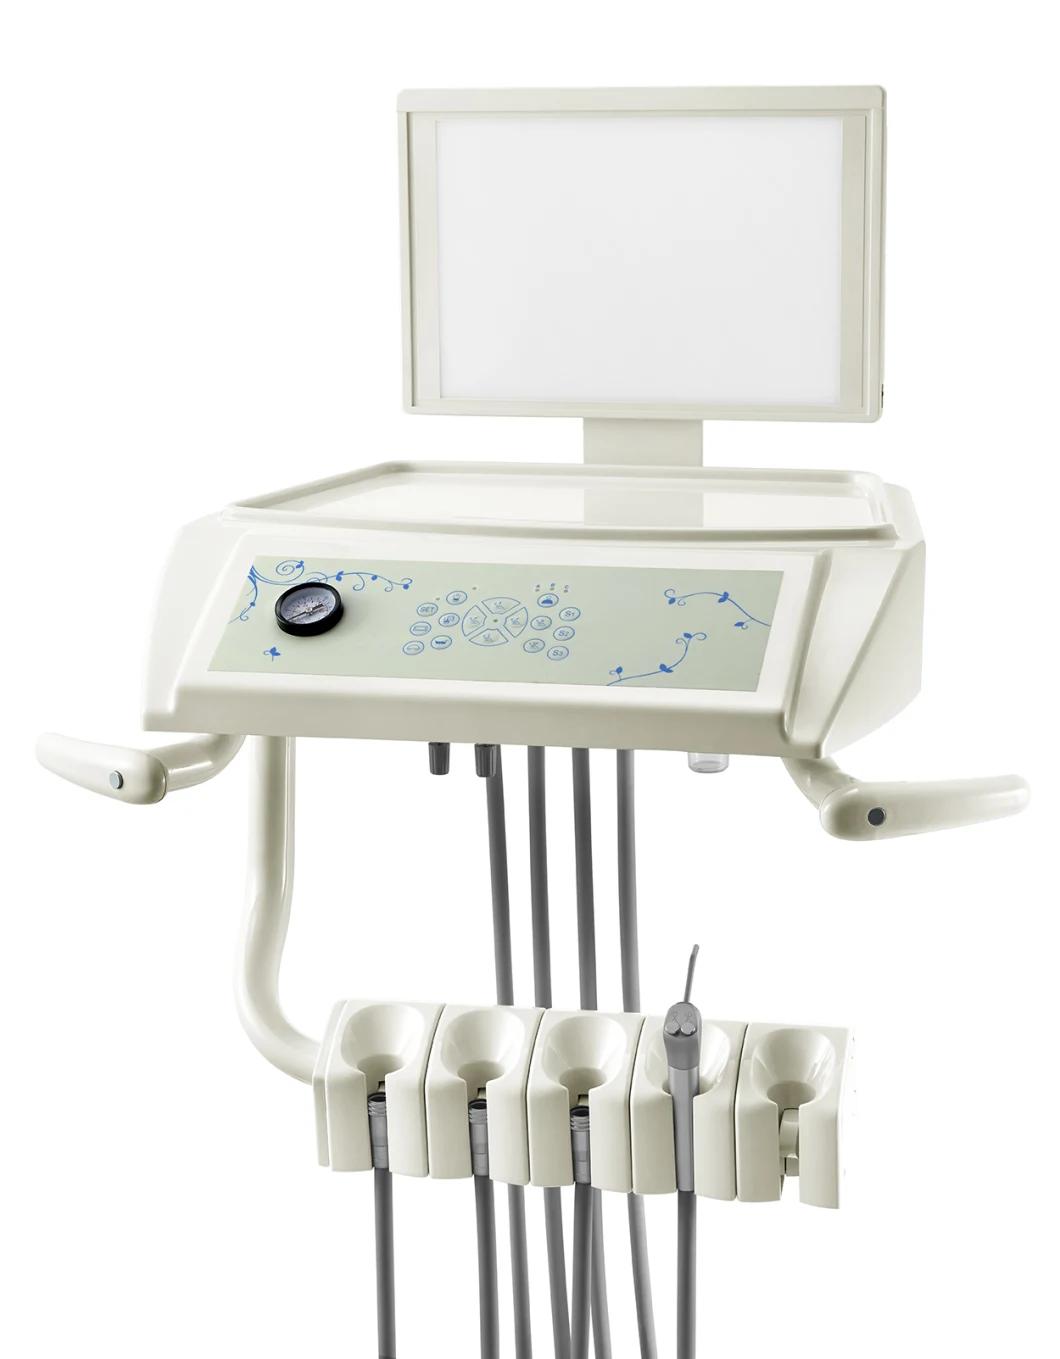 China Large Film View Intelligent with Control System Dental Chair Unit